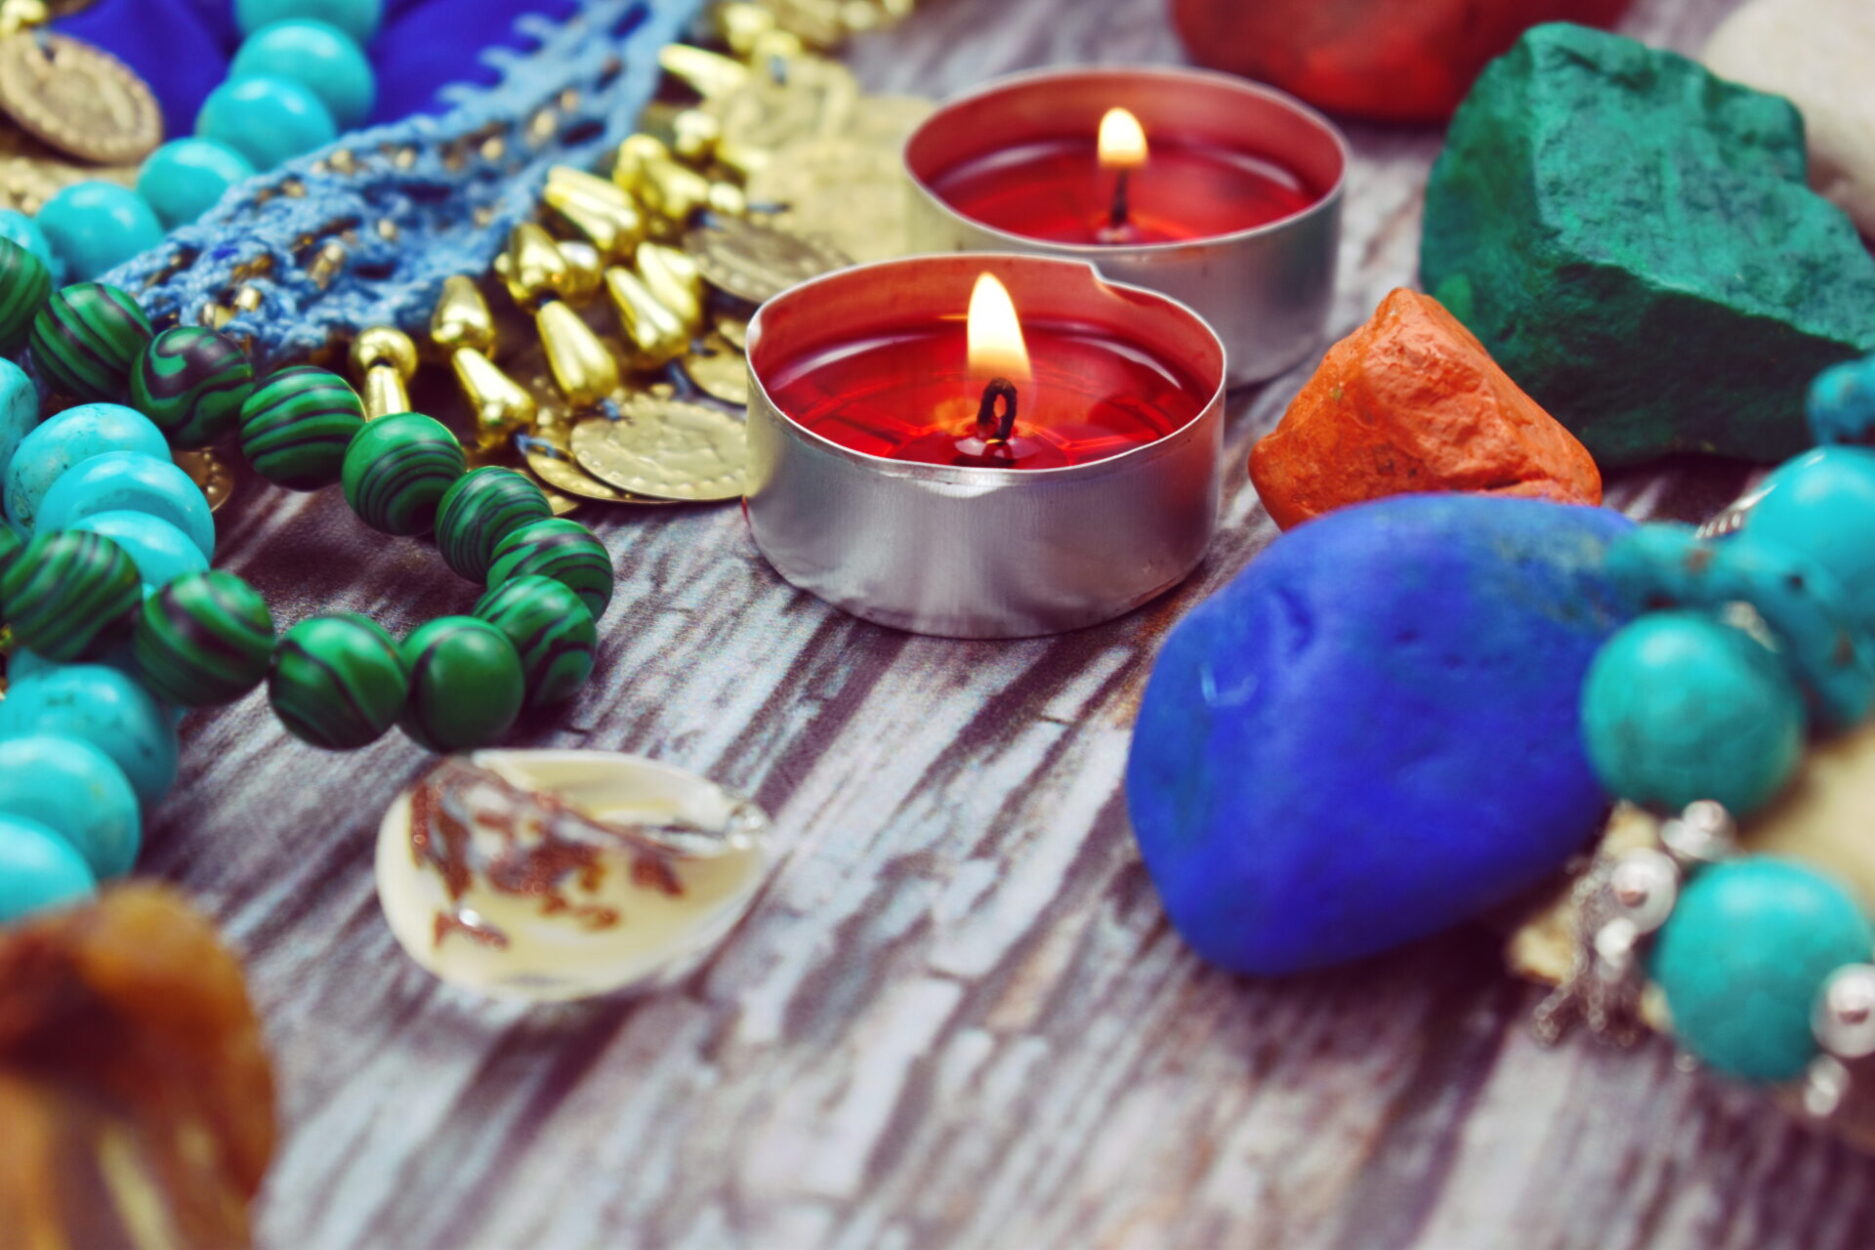 How Wearing Spiritual Items Can Change Your Outlook In Life - Stacyknows